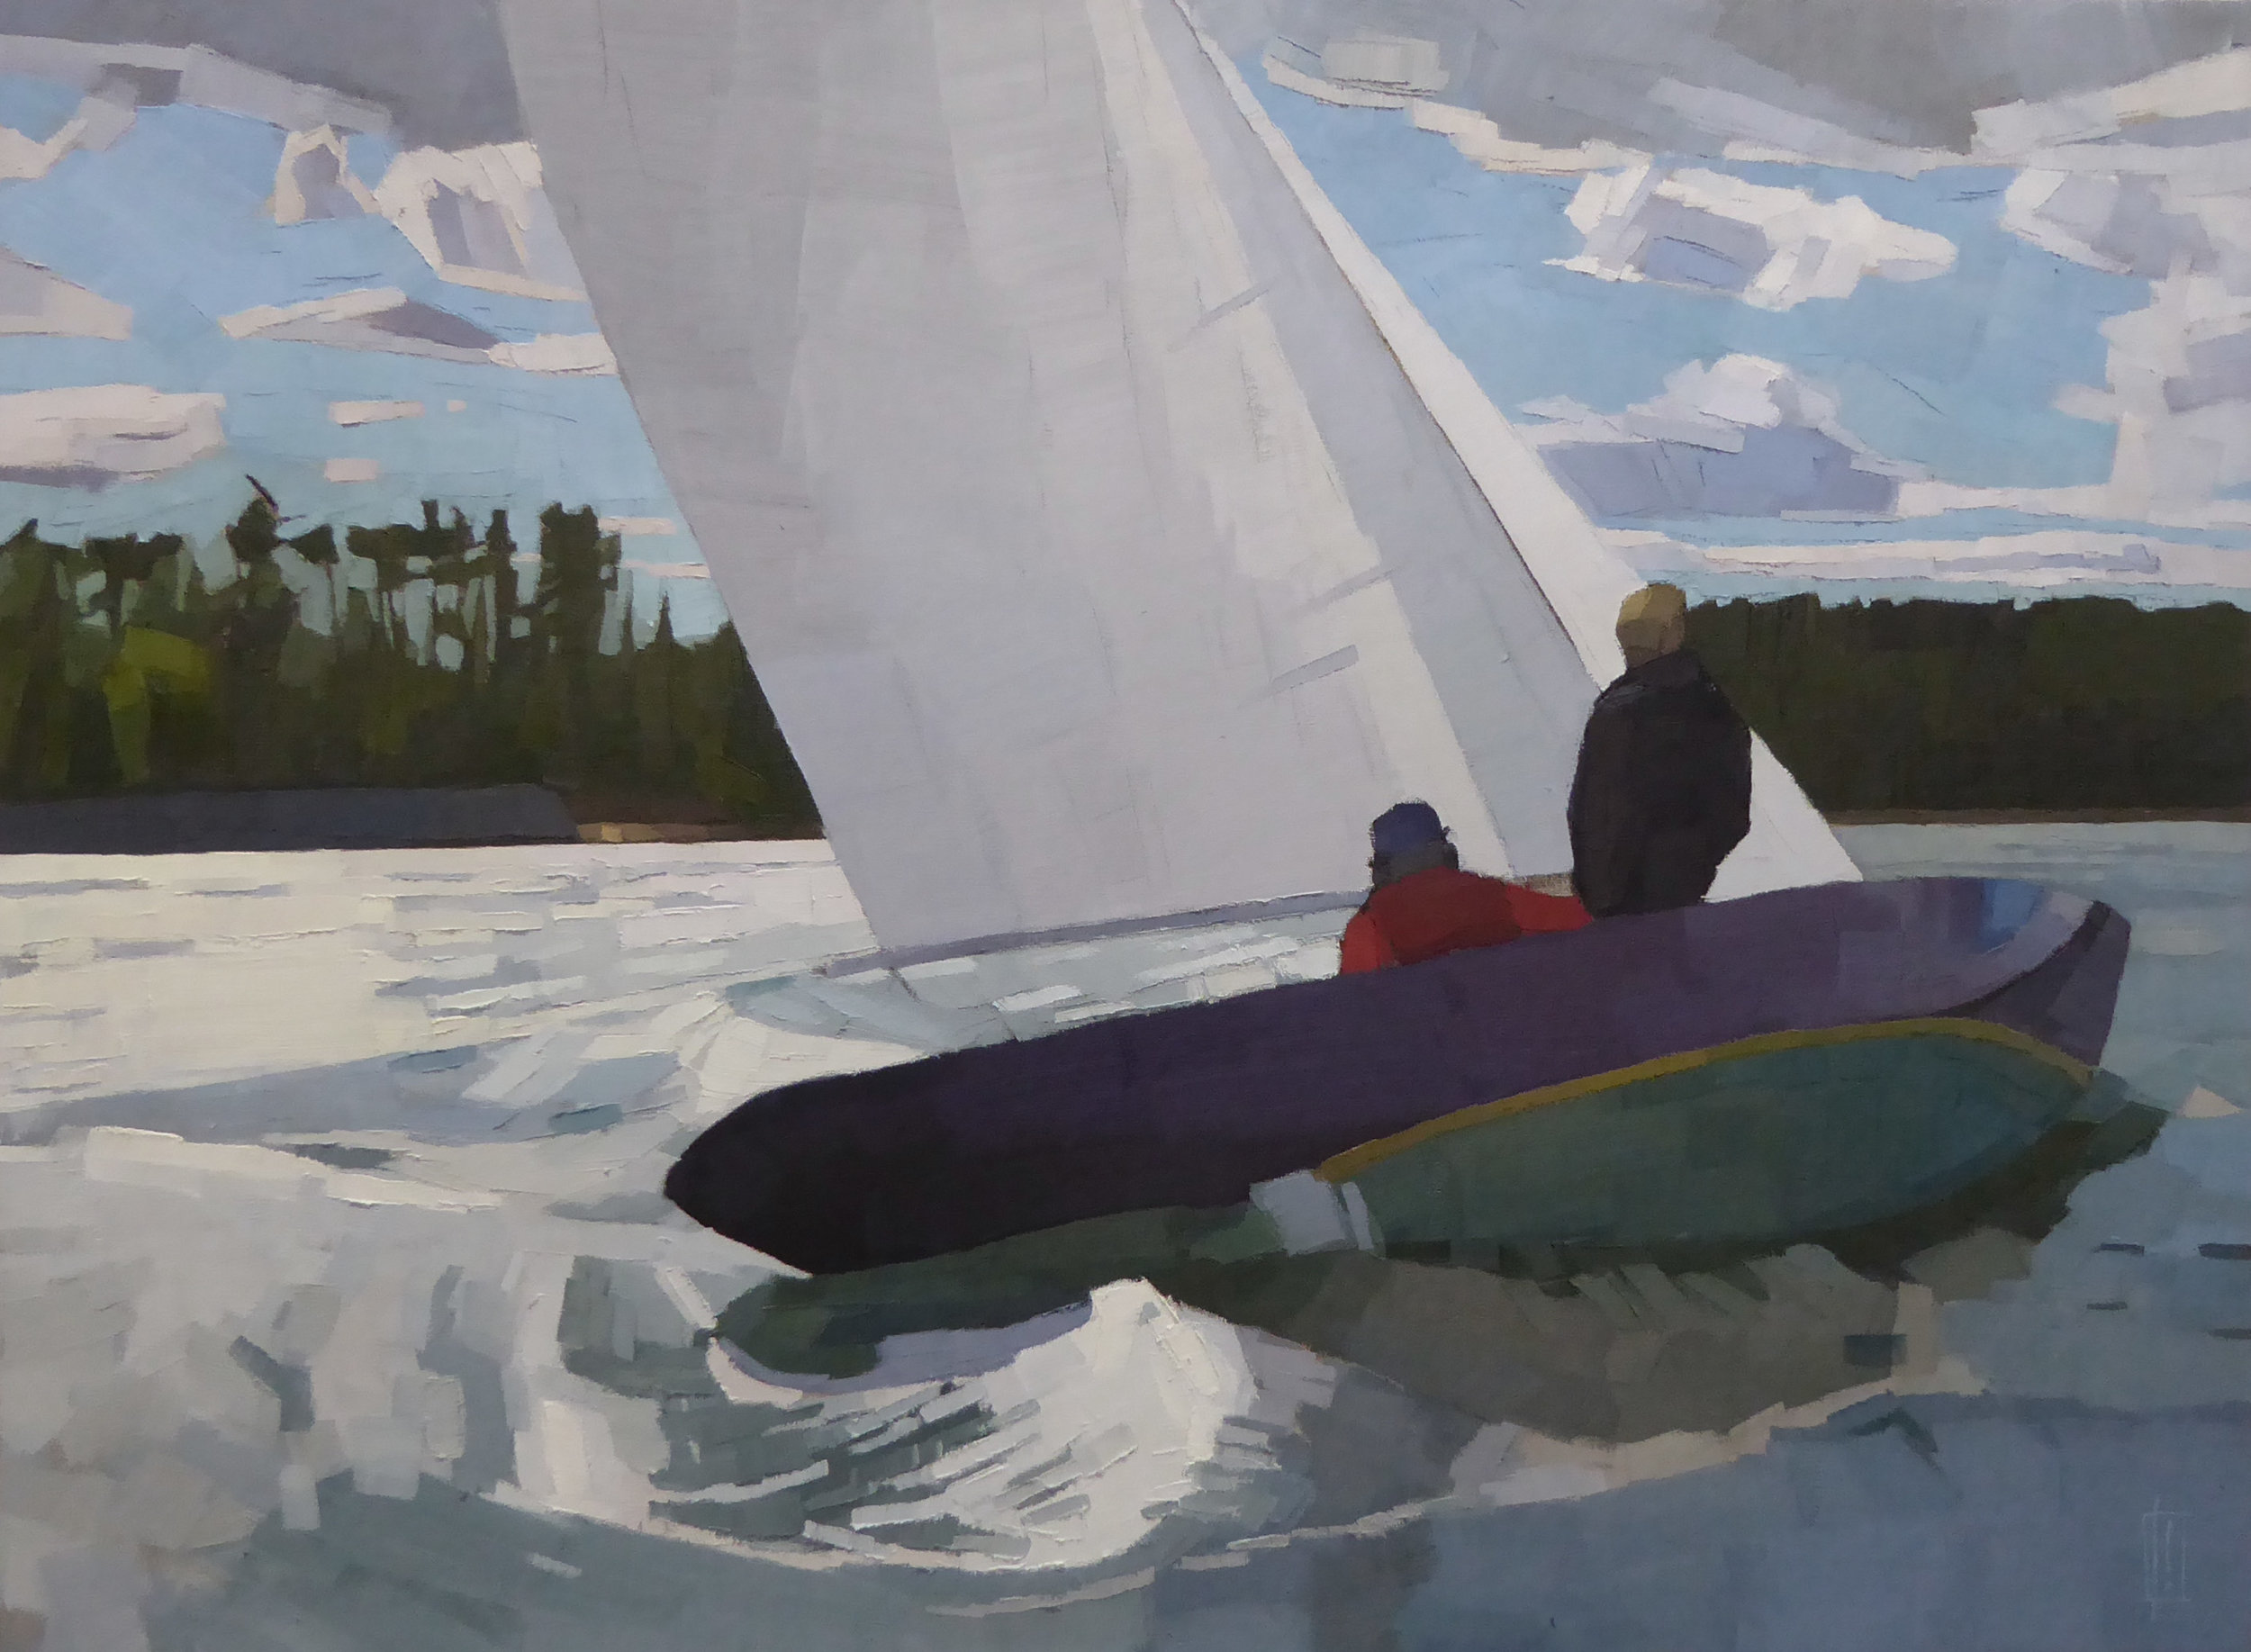   Late Summer Sail  30 x 40 oil on linen  sold   Islesford Artists    